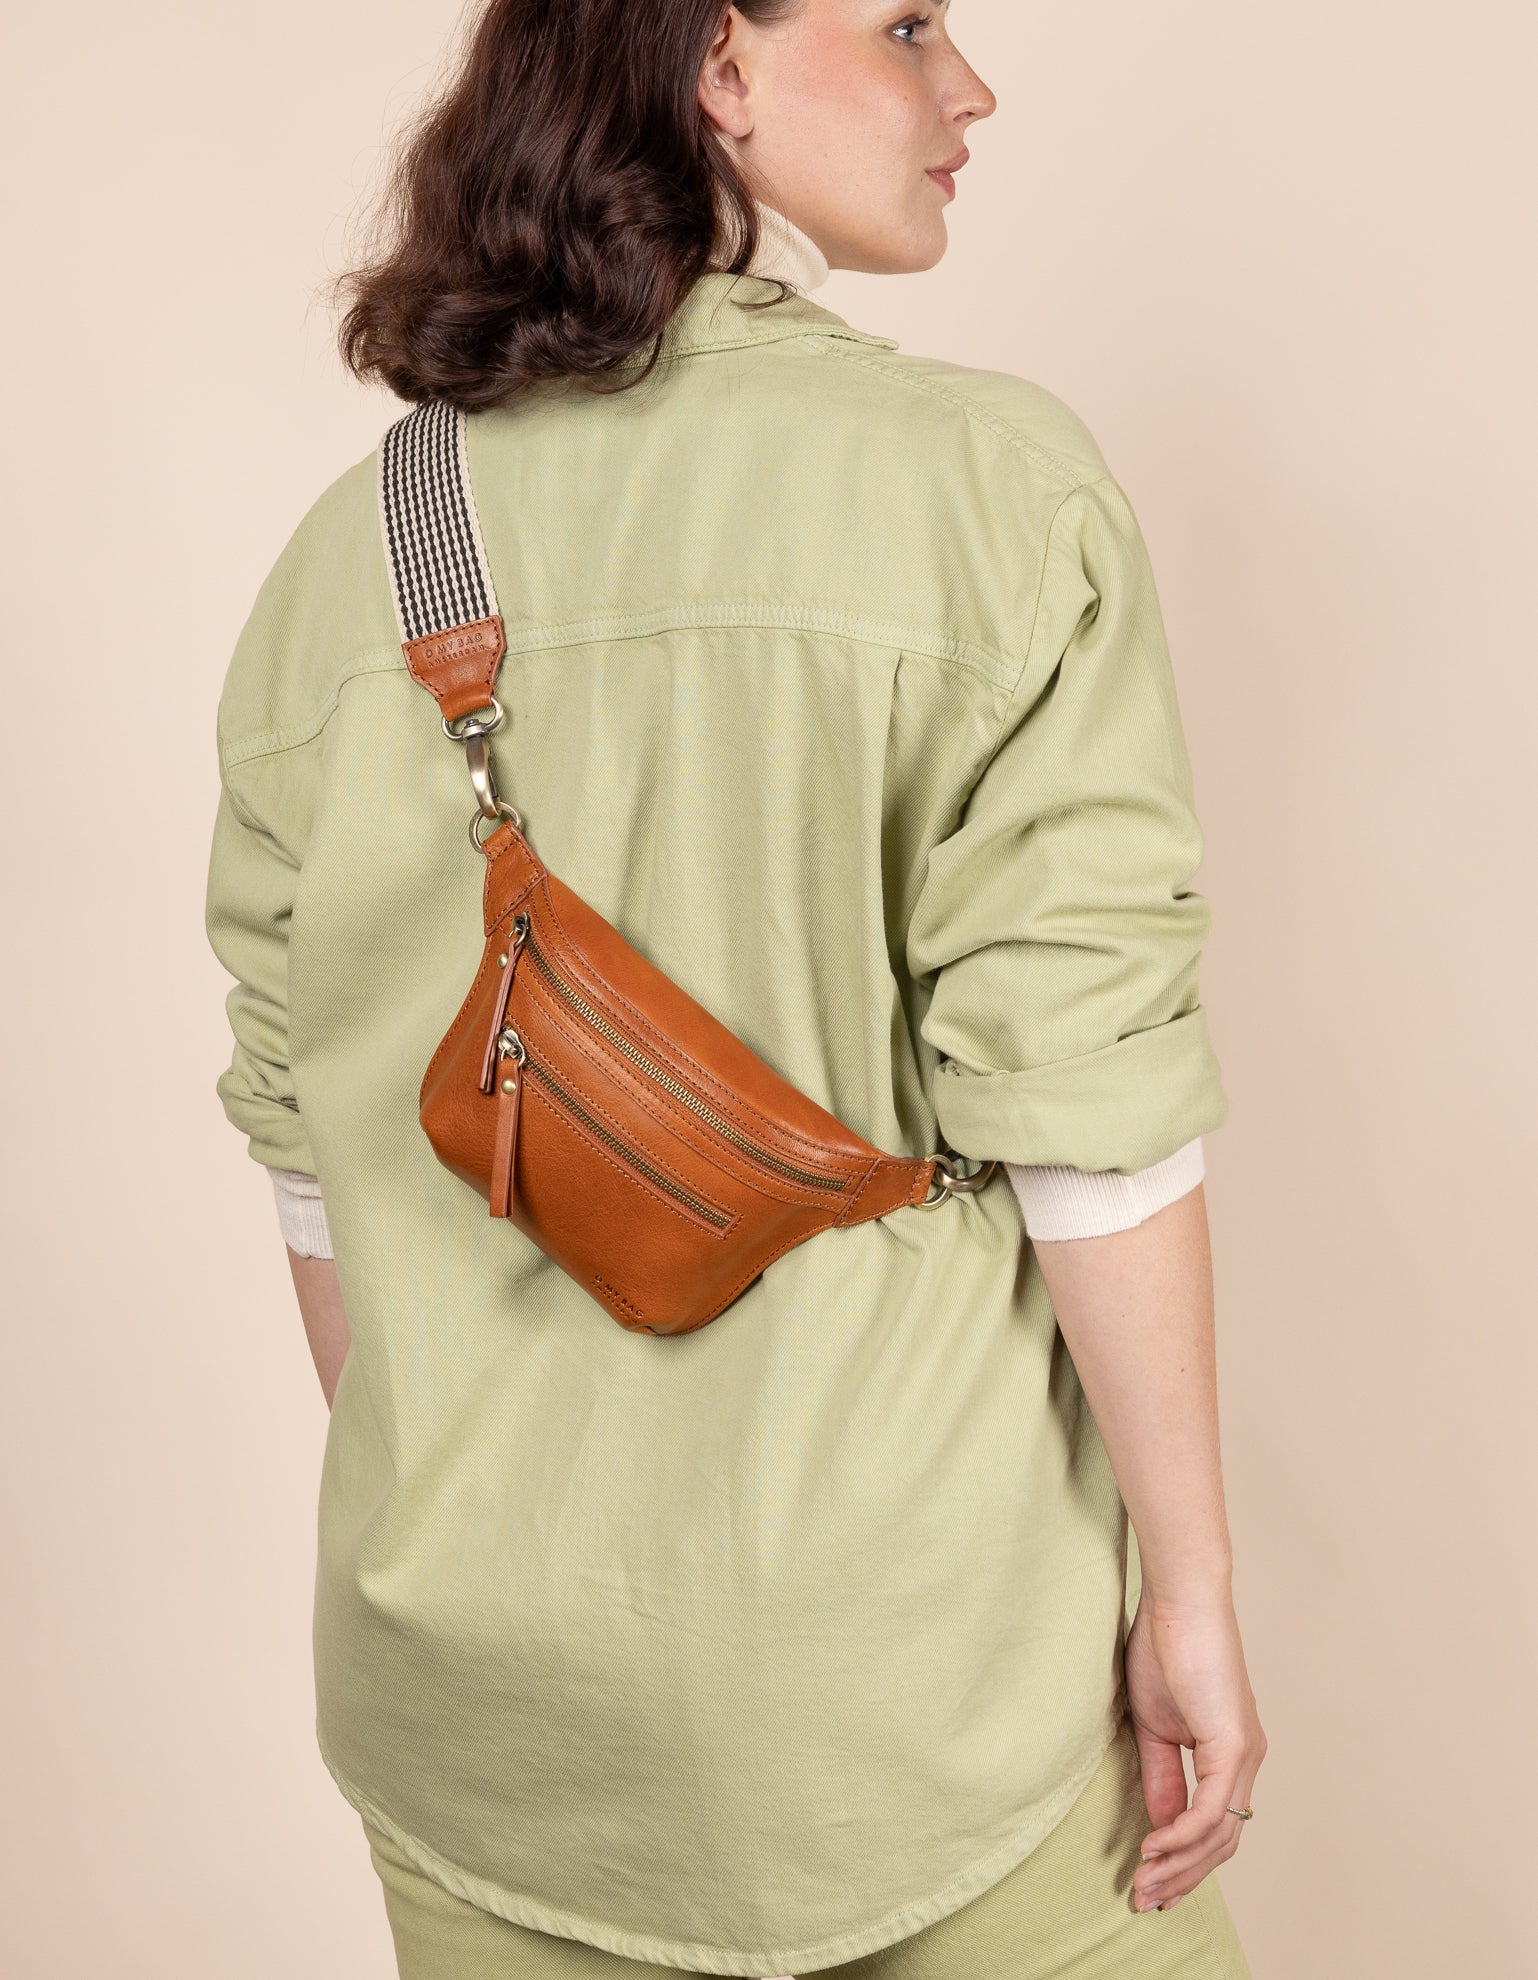 Cognac Leather womens fanny pack. Square shape with an adjustable strap. Model product image